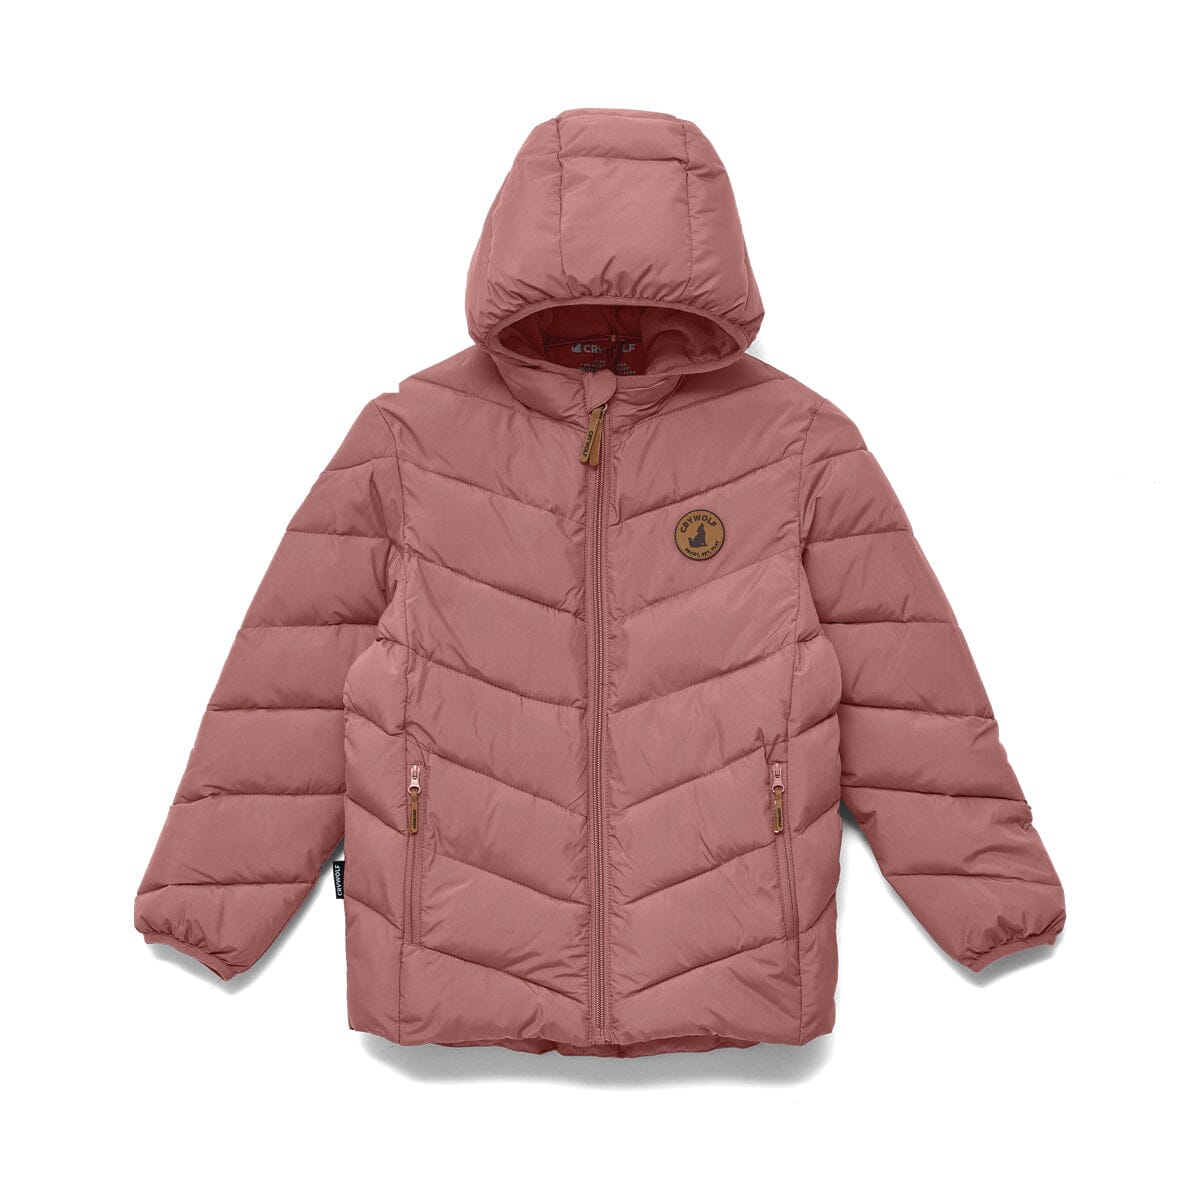 Crywolf | ECO PUFFER - Rosewood *** PRE ORDER / DUE EARLY-MID APRIL *** Girls Crywolf